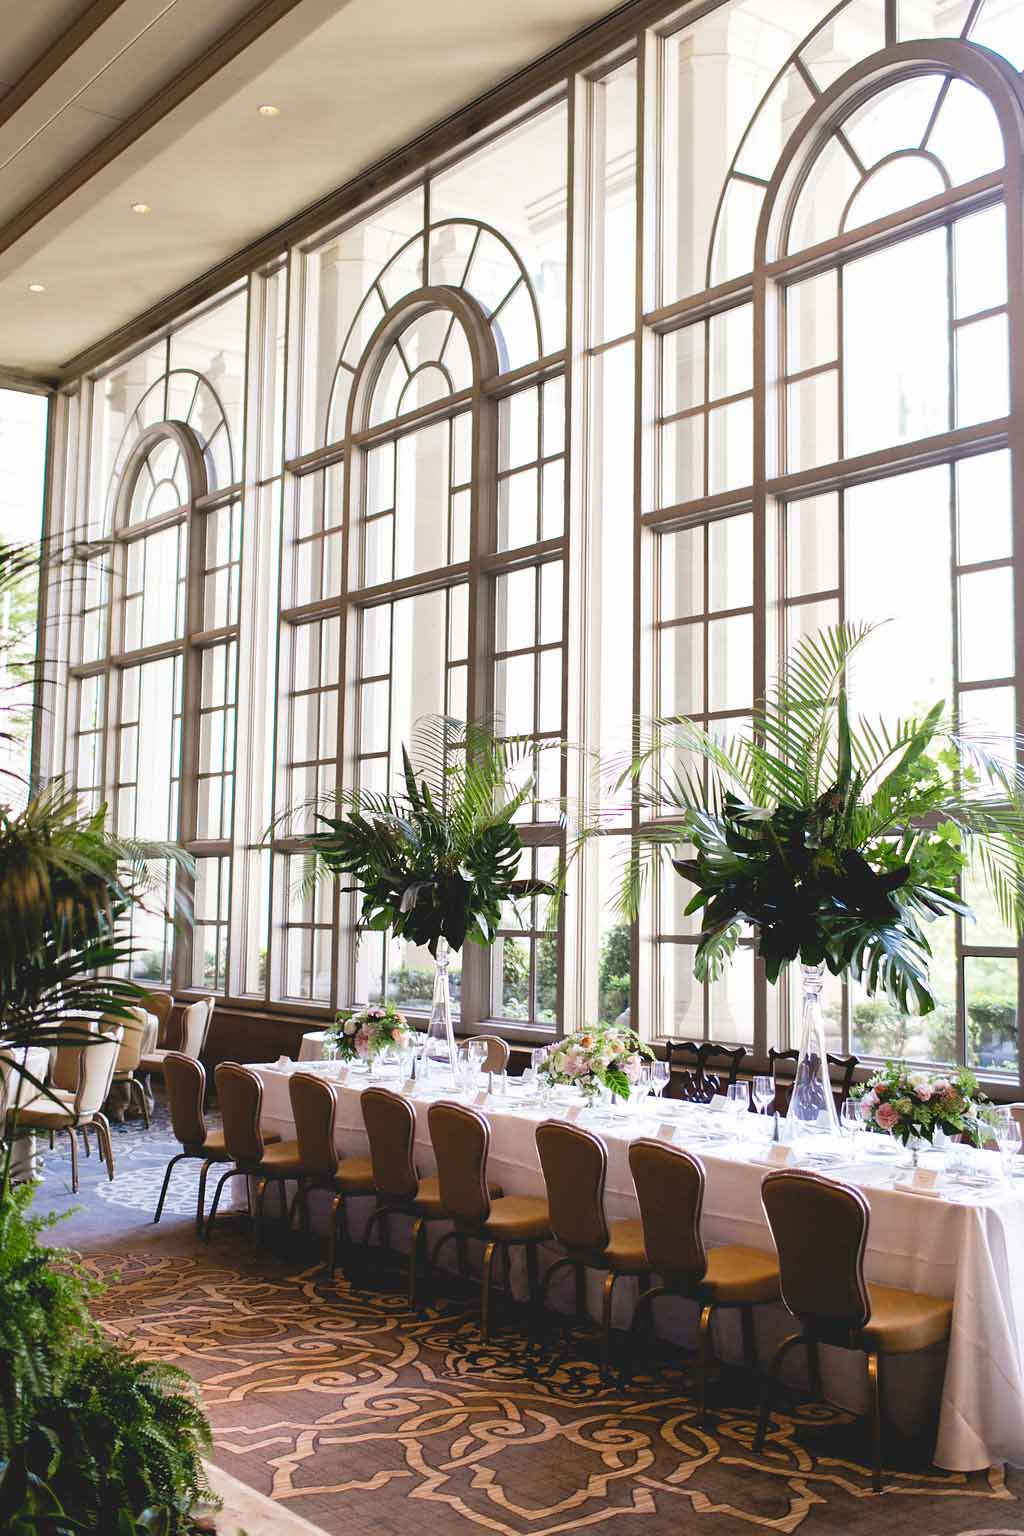 Bella Fiori, Seattle Wedding Florist, Fairmont Olympic Hotel - Garden Room Reception with large centerpieces of all greenery and tropical leaves